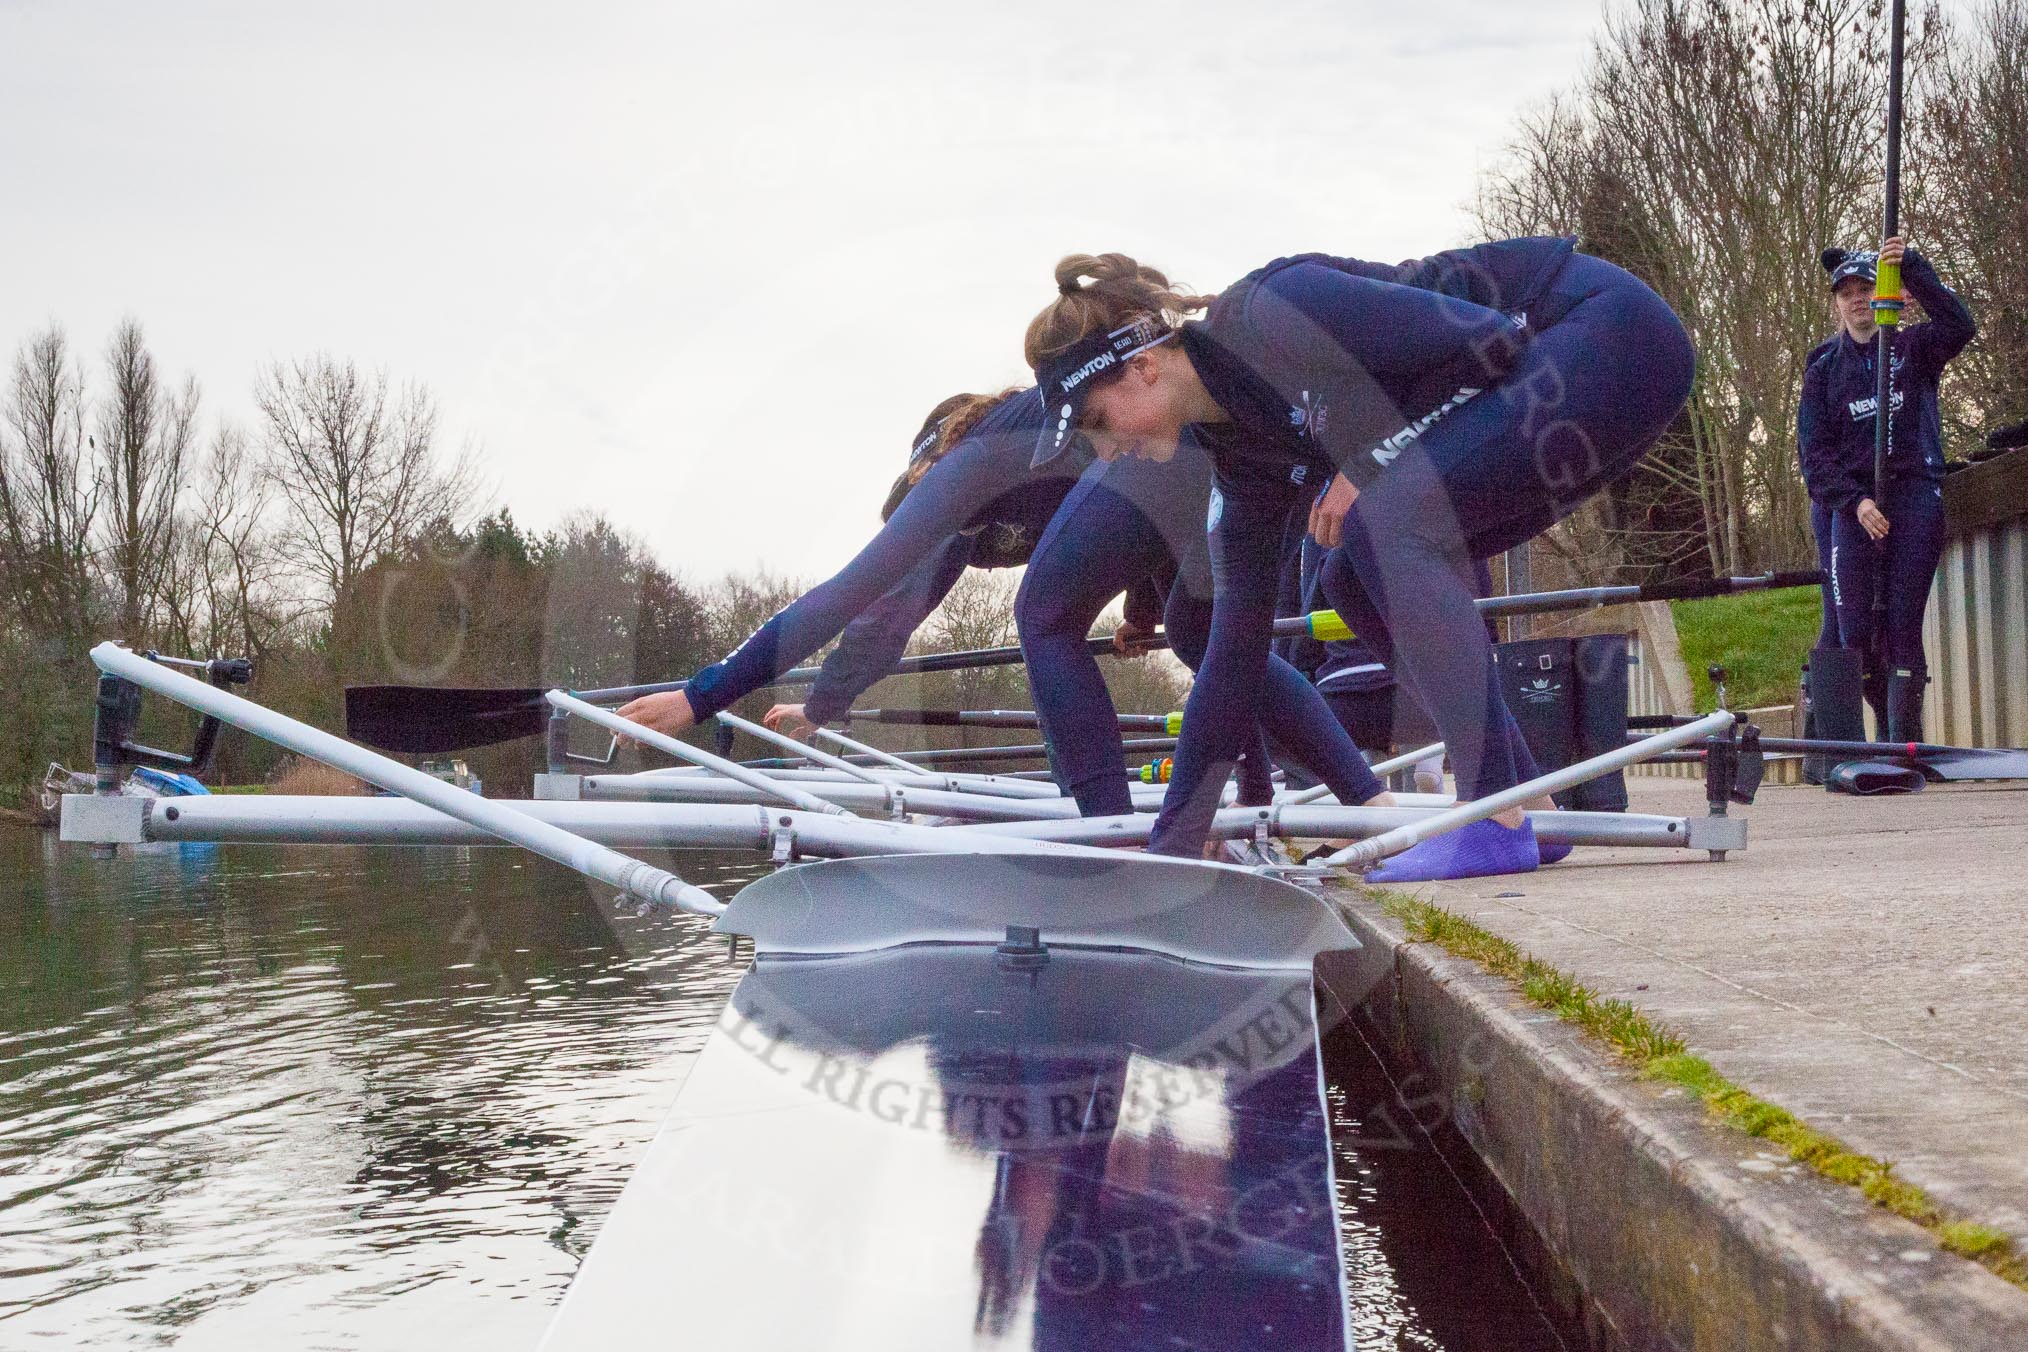 The Boat Race season 2016 - OUWBC training Wallingford: The OUWBC reserve boat crew getting ready for their training session on the Thames at Wallingford.
River Thames,
Wallingford,
Oxfordshire,

on 29 February 2016 at 15:16, image #34